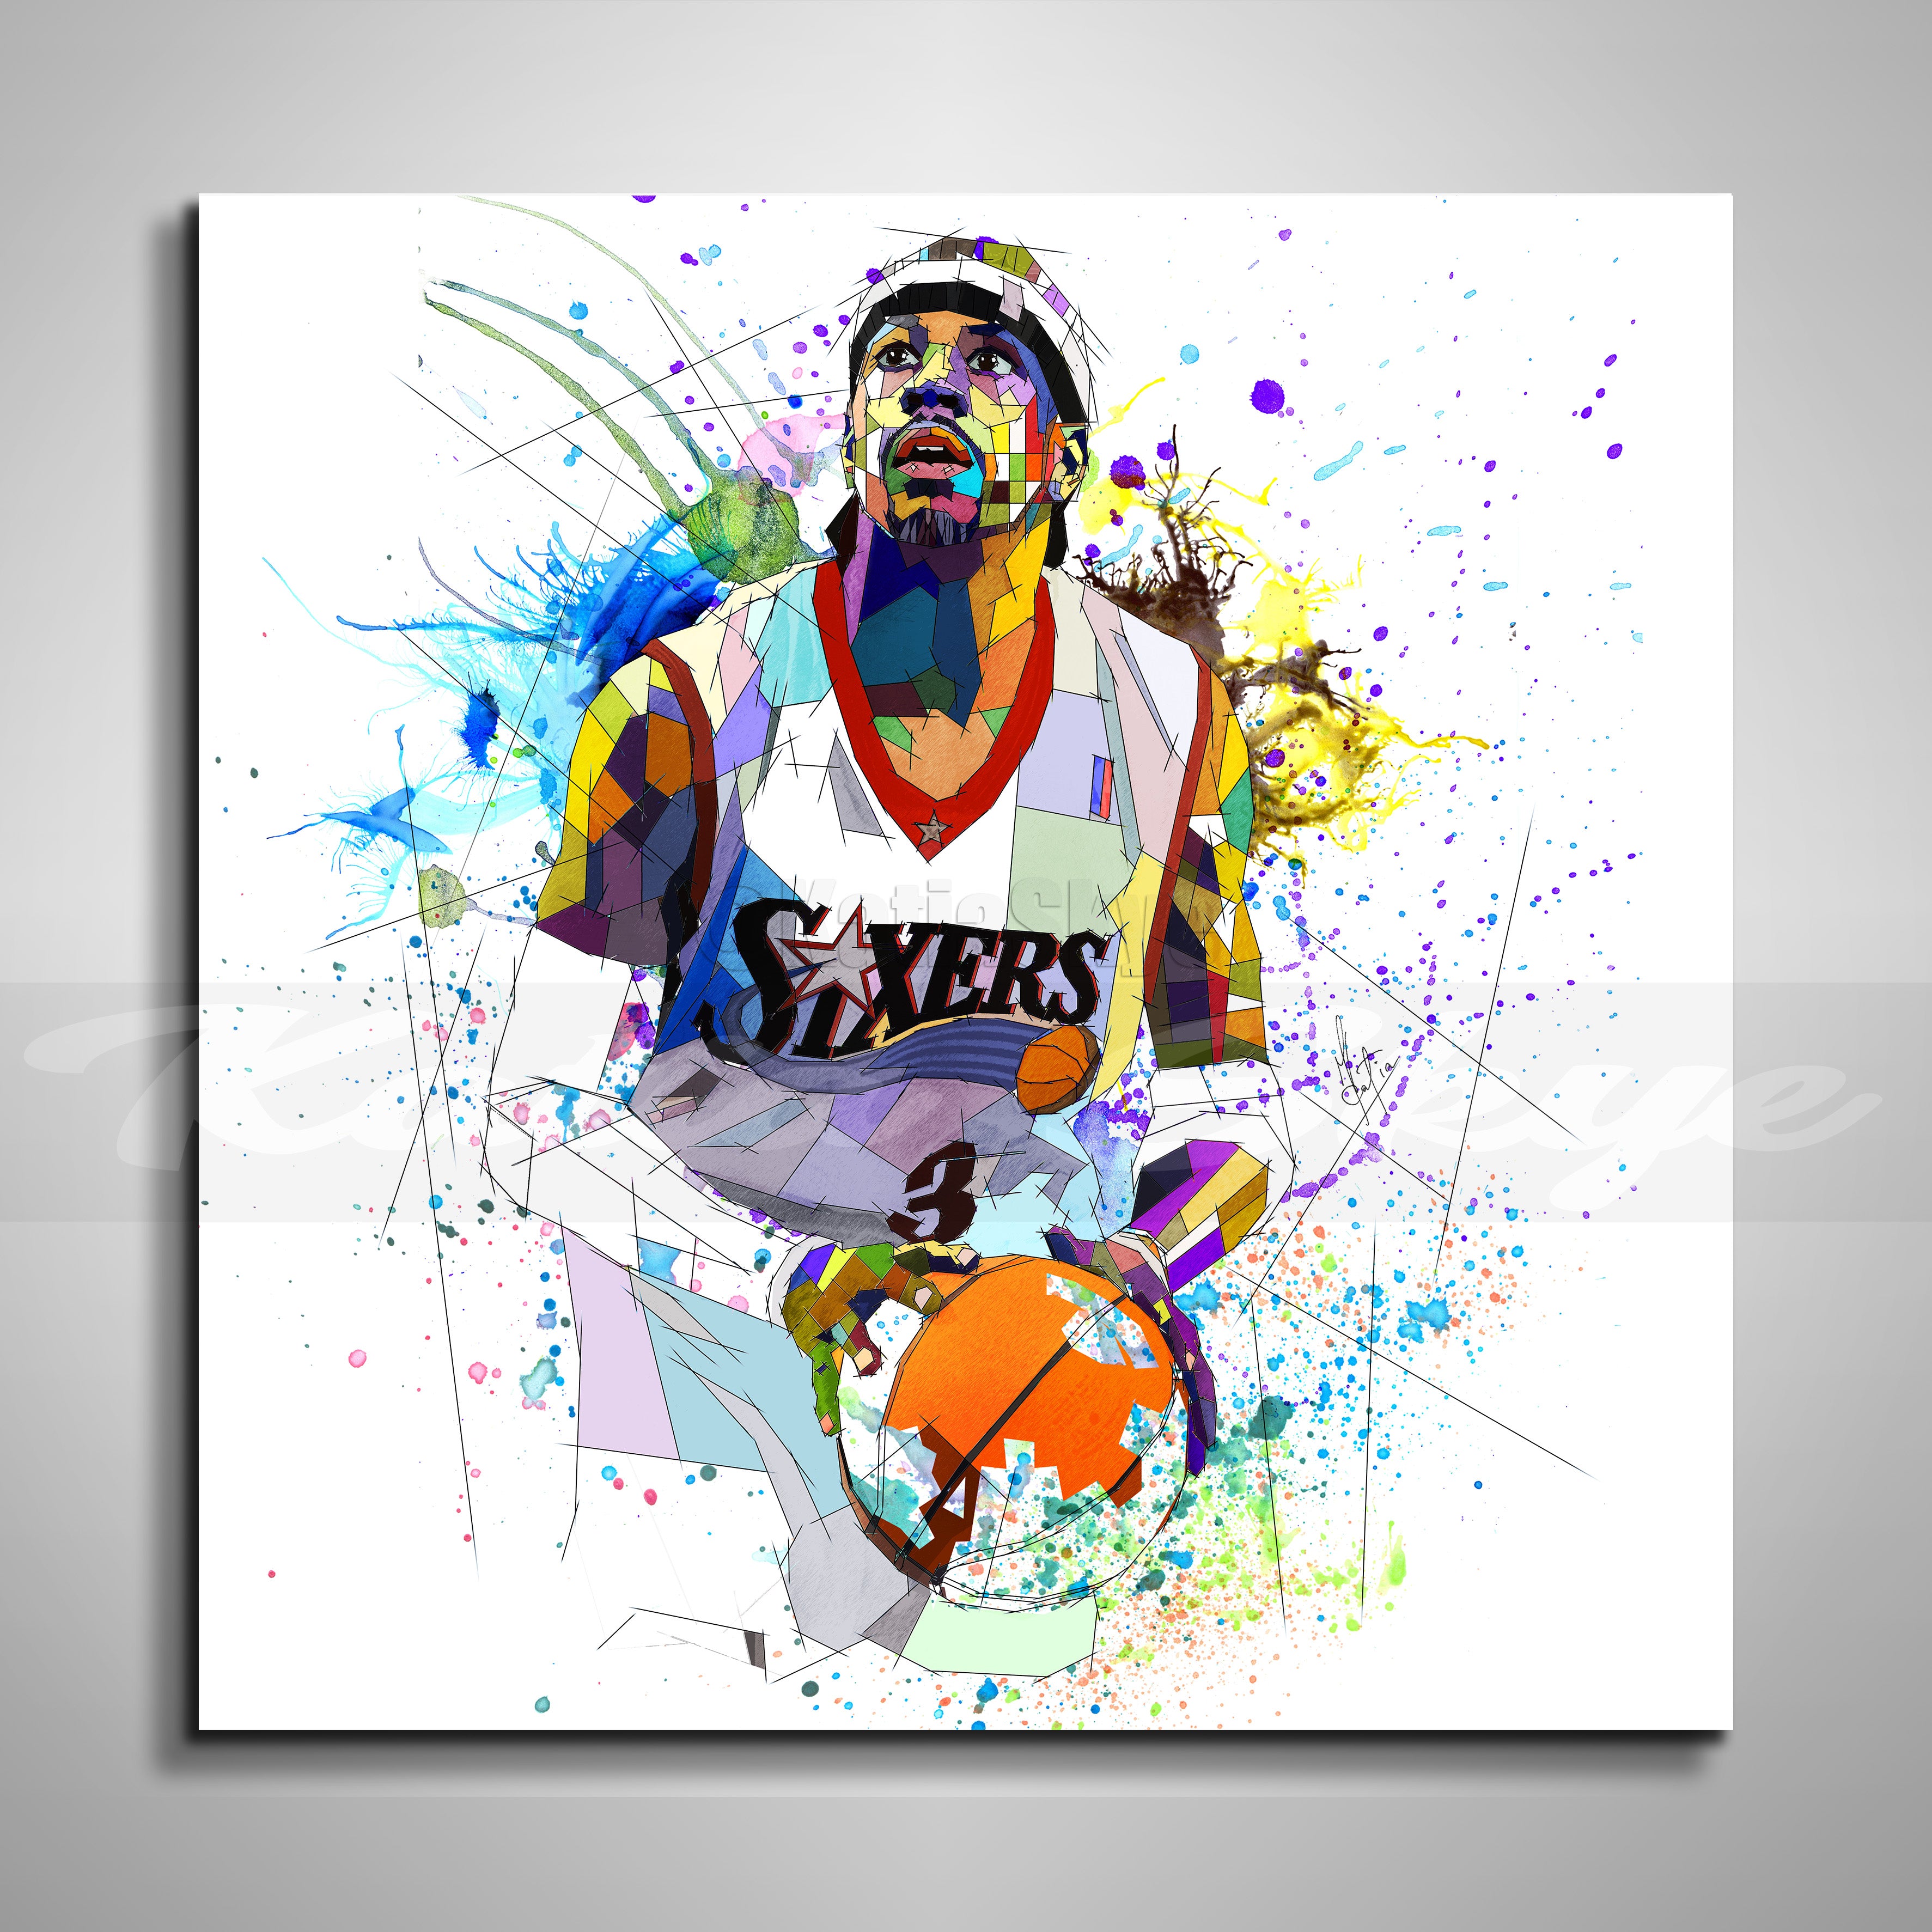 ABSTRACT BASKETBALL WALL ART INSPIRED BY ALLEN IVERSON IN ACTION // NBA-AI02